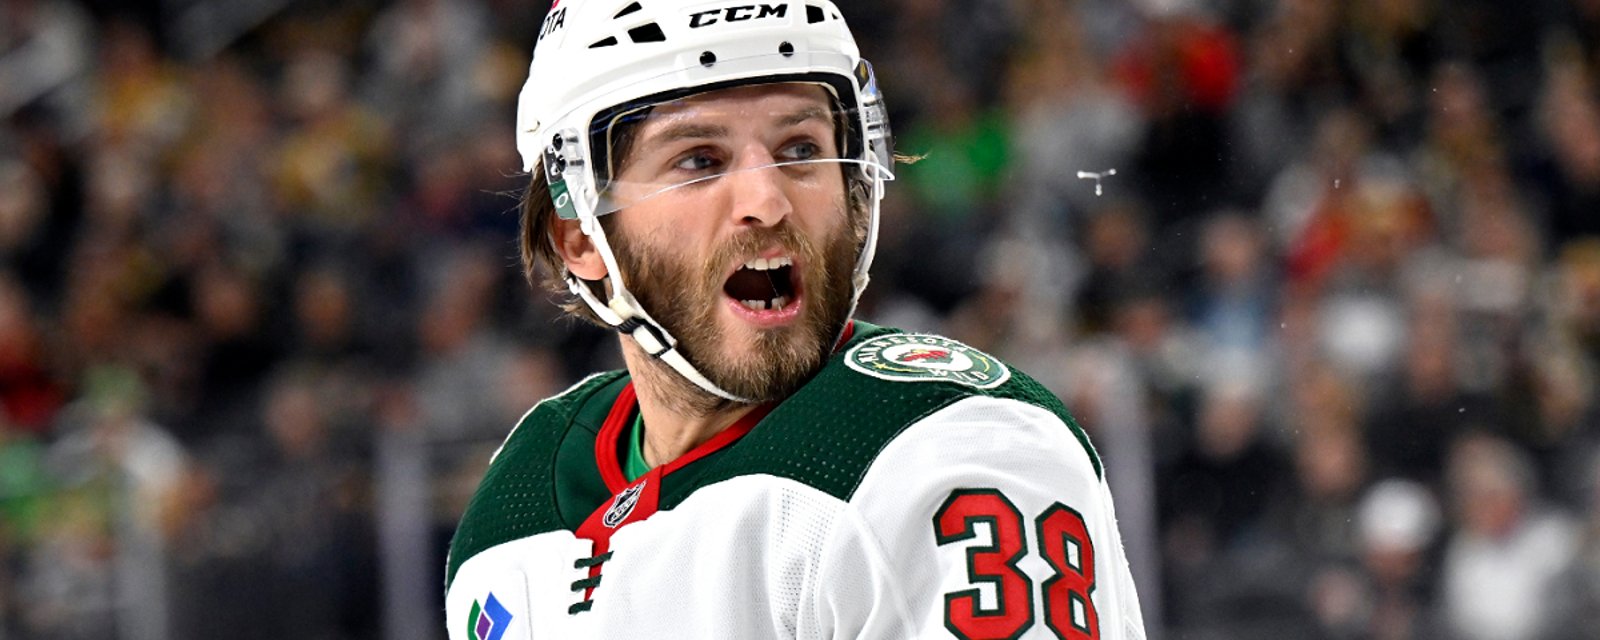 Ryan Hartman fires back at accusations from Cole Perfetti.